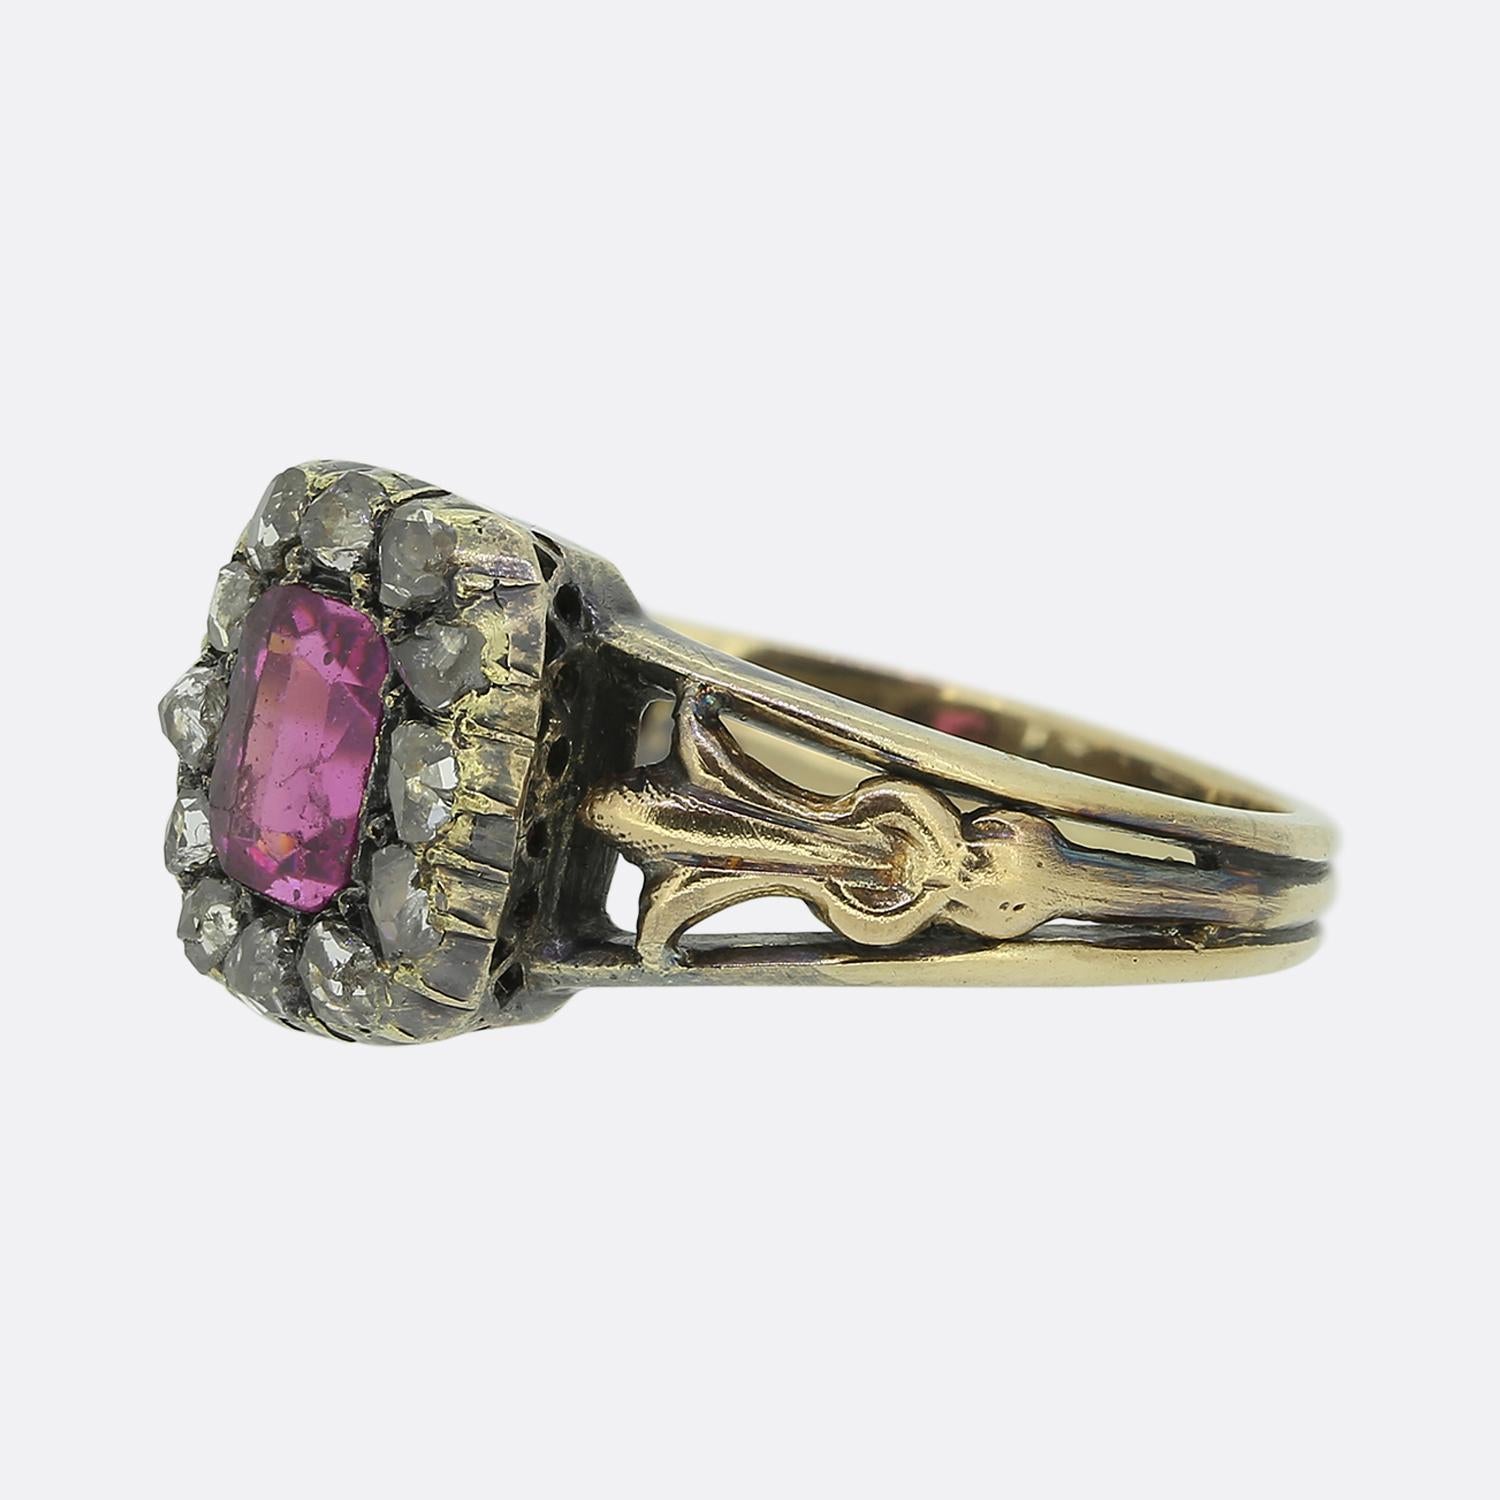 Here we have a lovely antique cluster ring. A single emerald shaped pink paste sits at the centre of the face and is contained within a frame of rose cut diamonds around the outer edge. The piece is accentuated through excellently open crafted